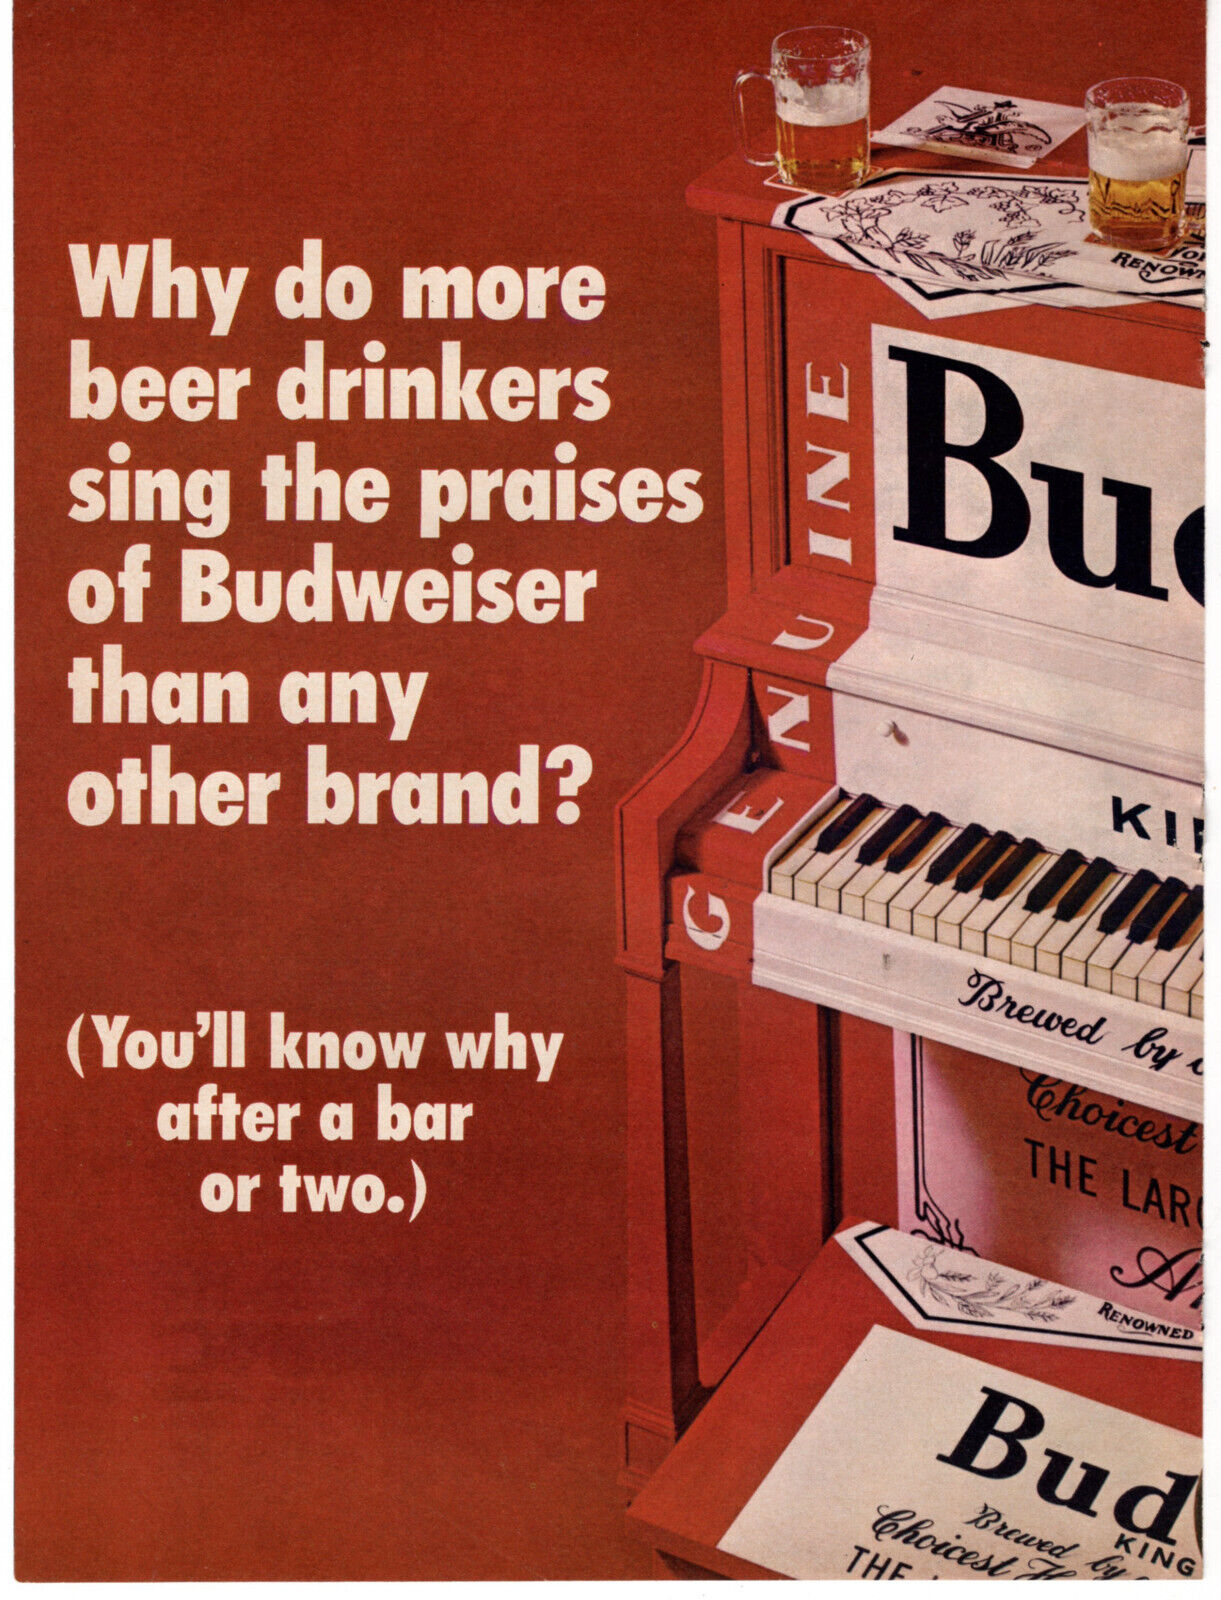 Budweiser King of Beers Piano 1970 Vintage 2 Pg Print Ad Original Man Cave Decor